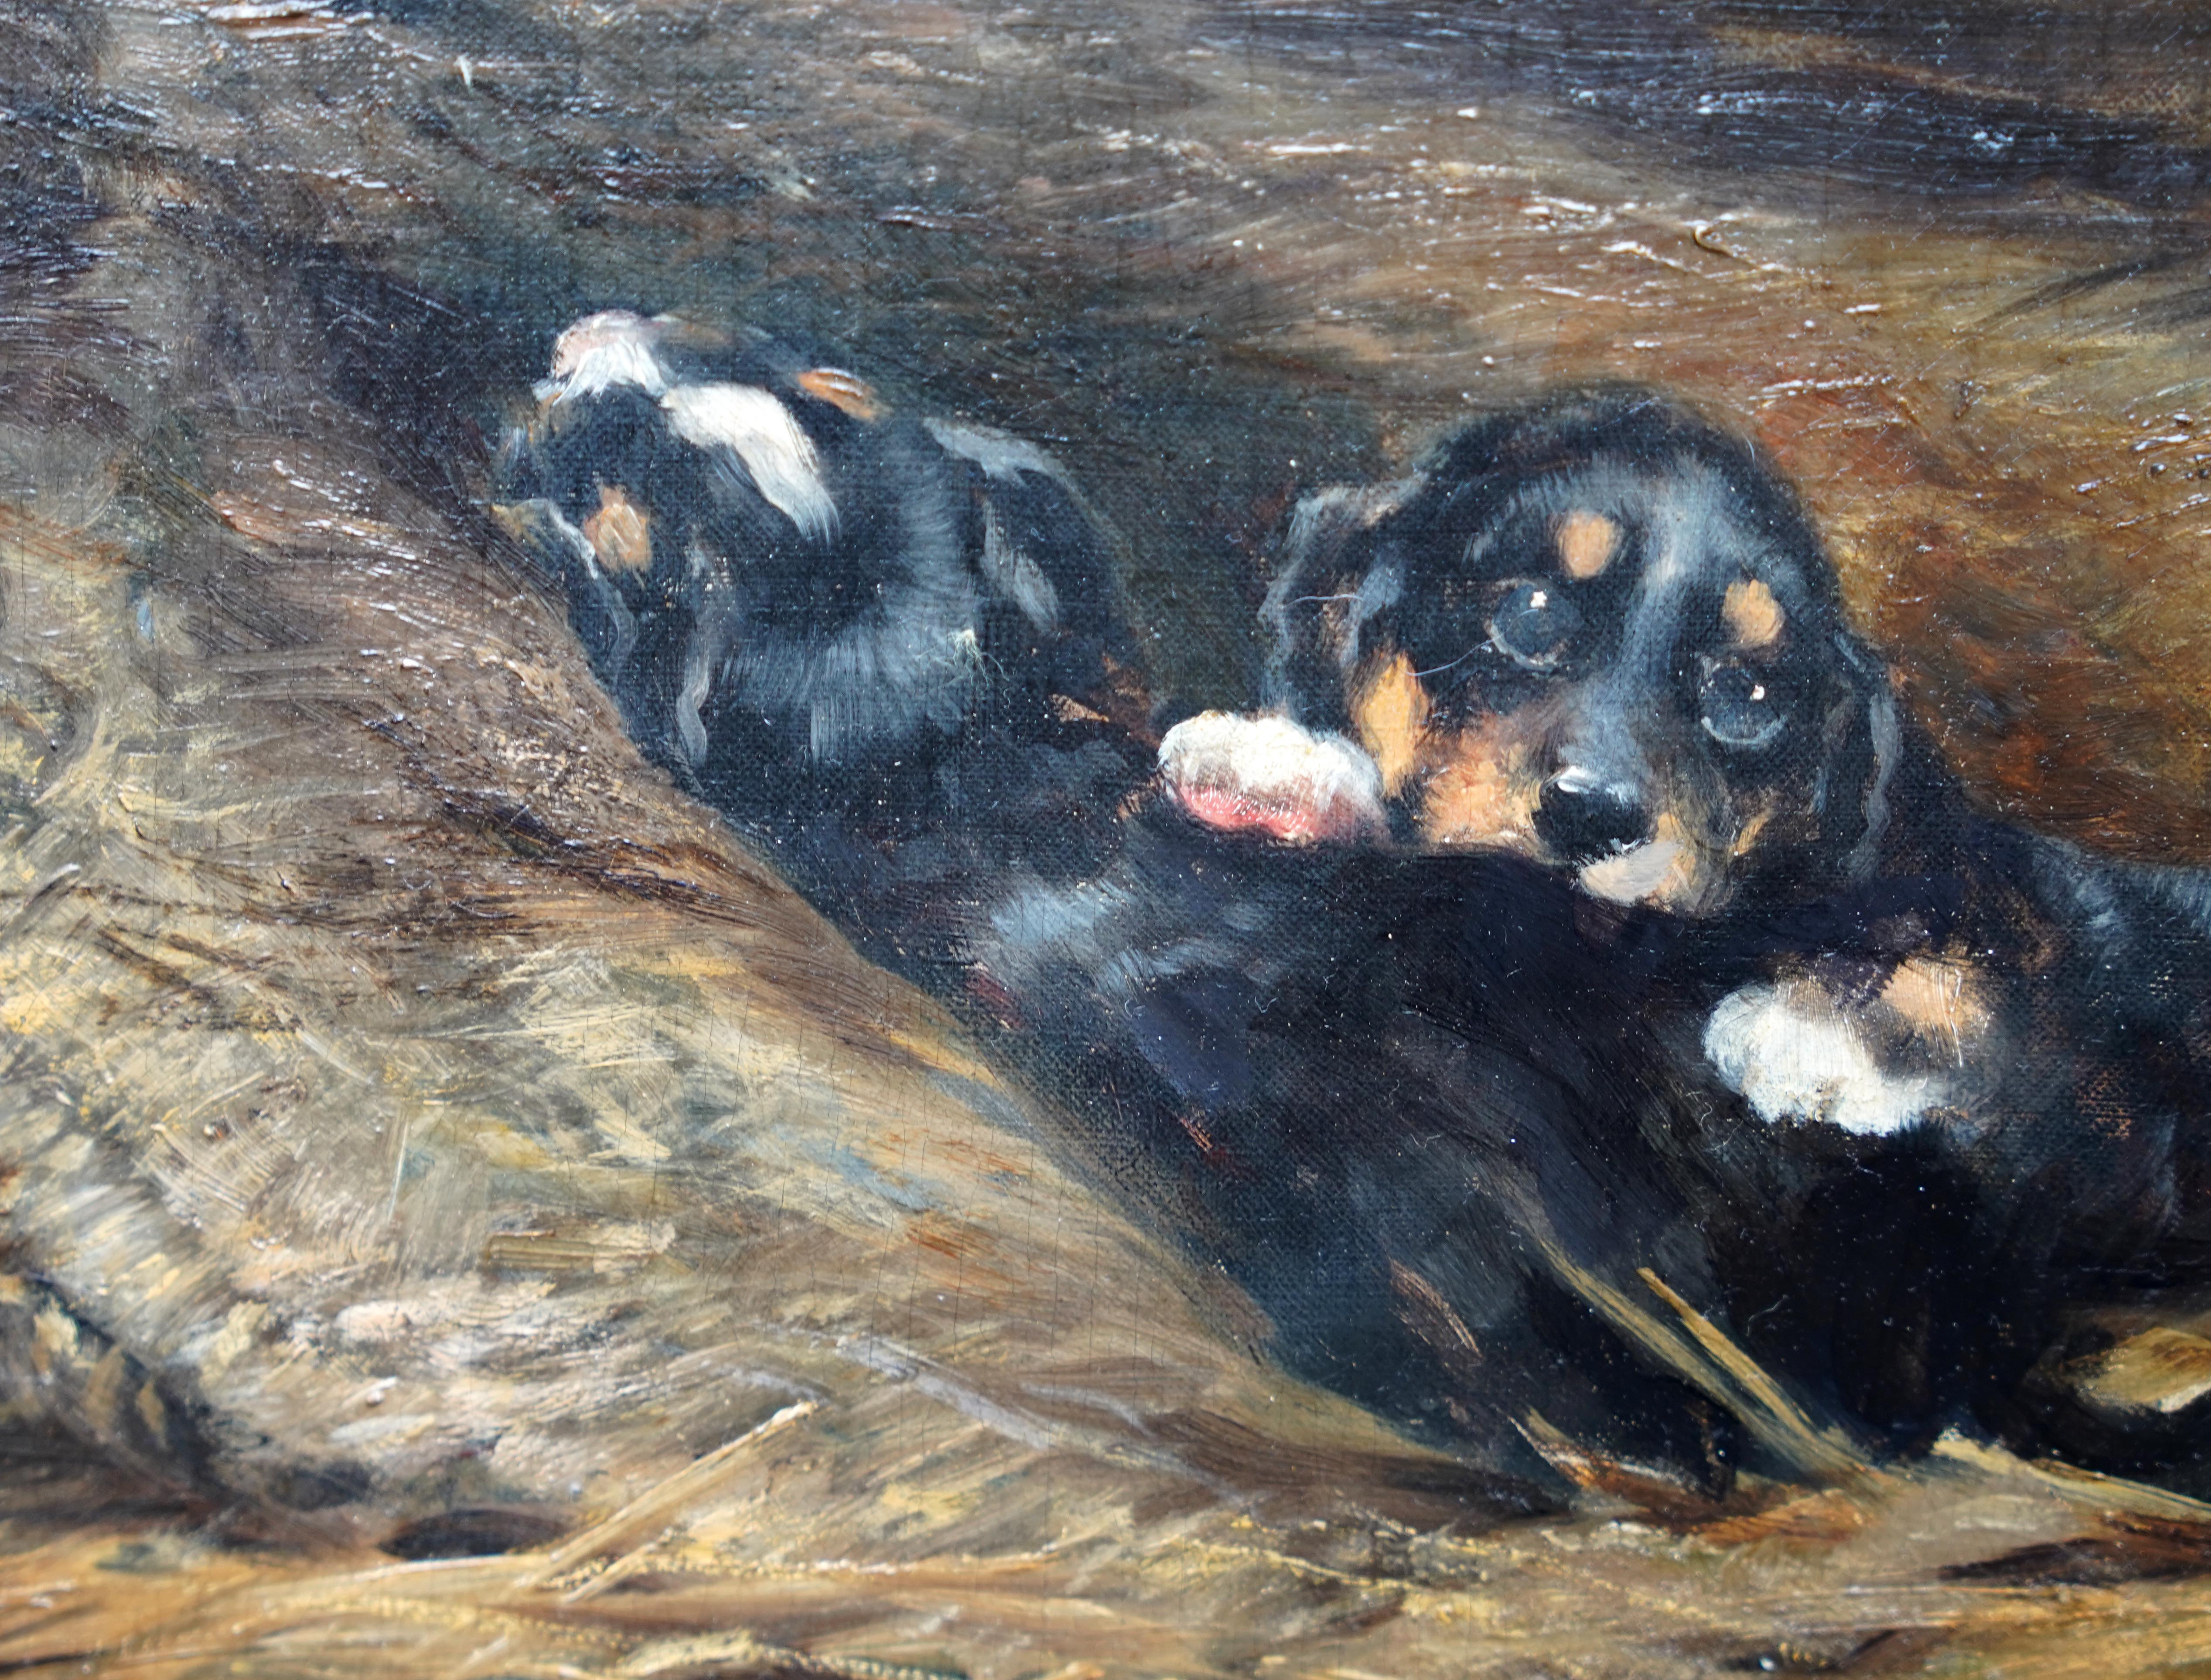 Mouse with Spaniel Puppies - British Edwardian art dog portrait oil painting - Realist Painting by Robert Morley